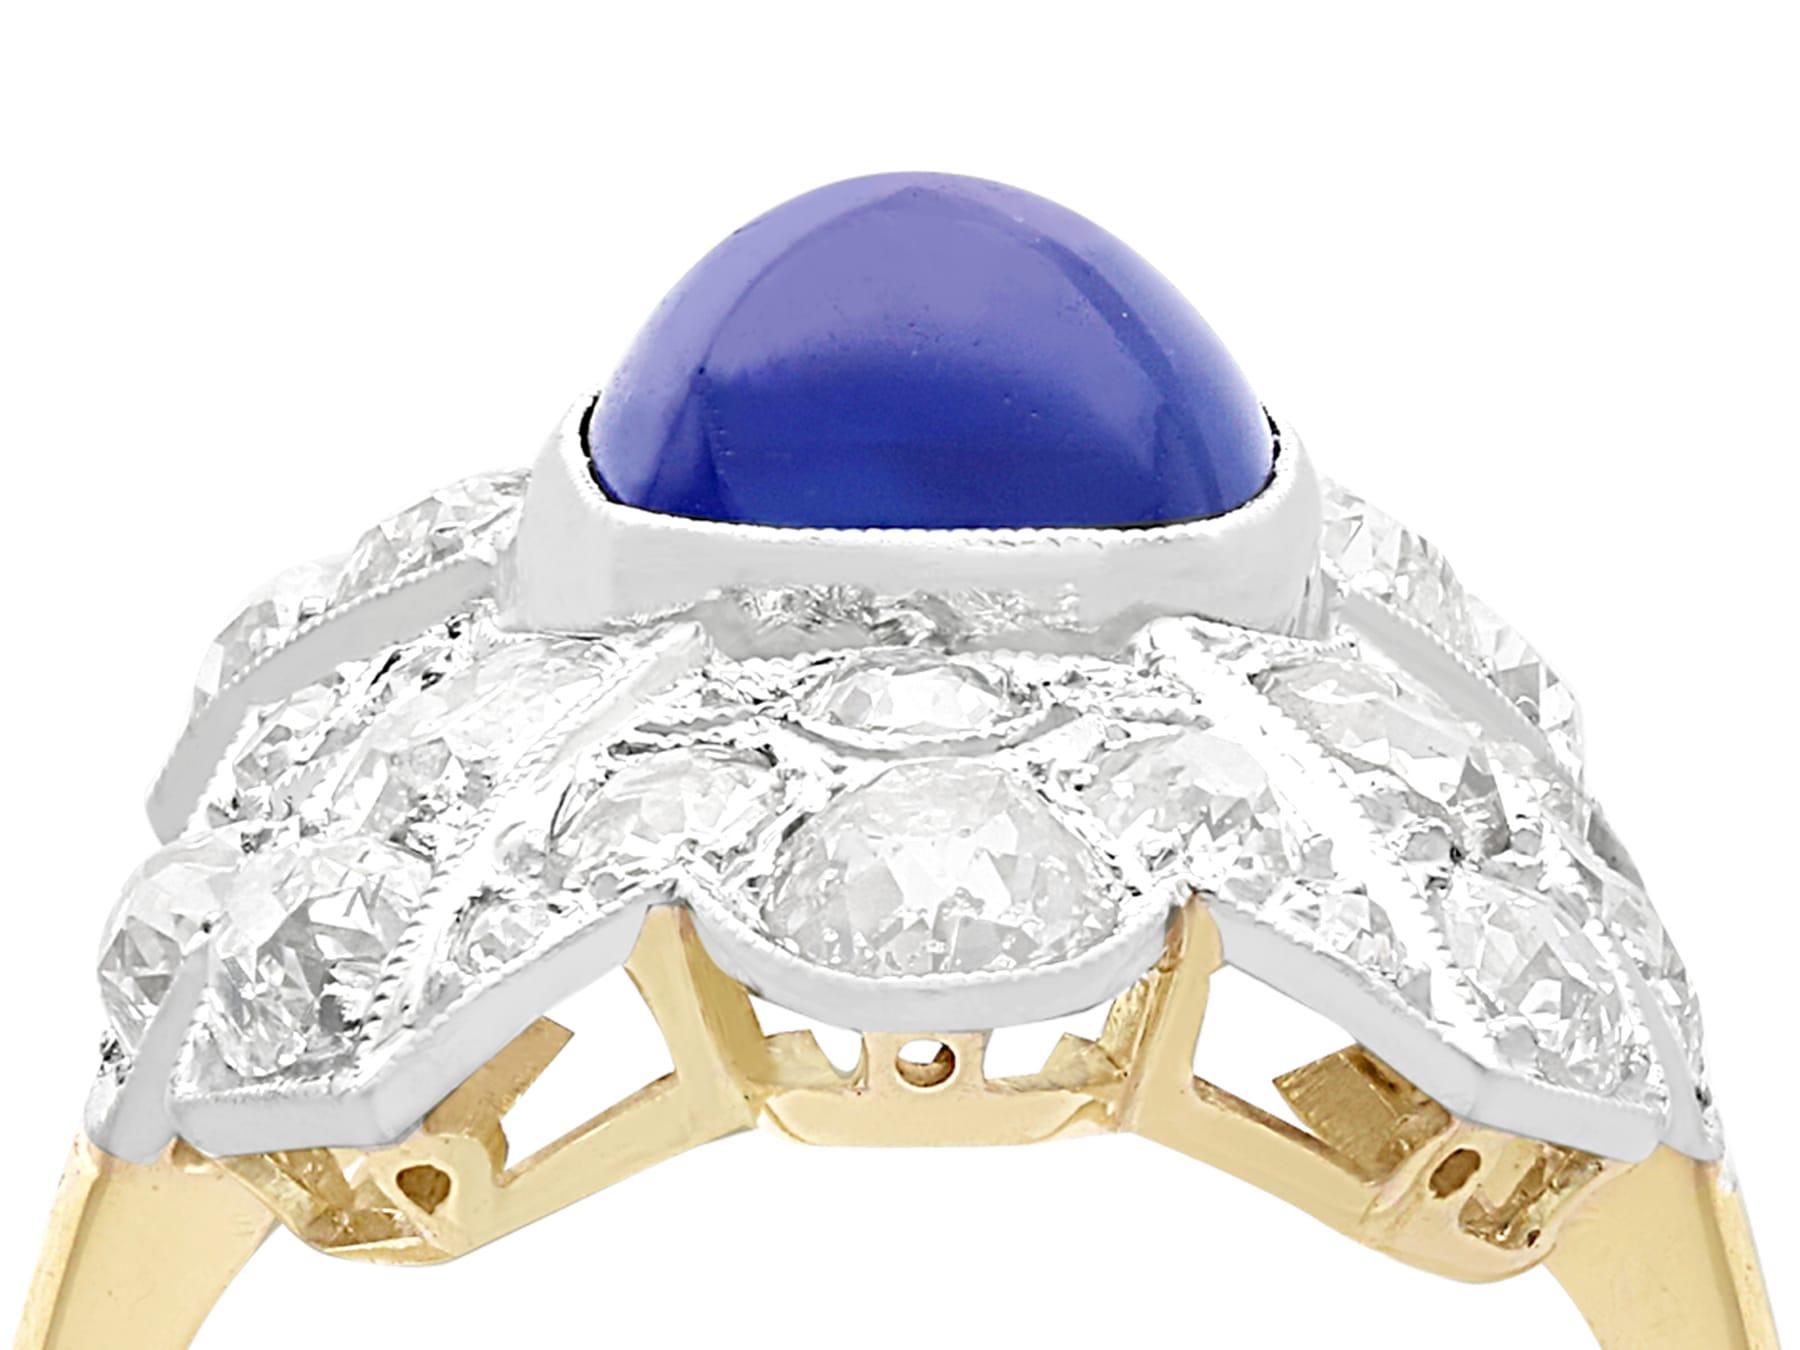 A stunning, fine, and impressive 2.02 carat sapphire and 2.78 carat diamond 14 karat yellow gold, platinum set cocktail ring; a part of our diverse collection of antique jewelry.

This stunning, fine, and impressive Art Deco antique sapphire and